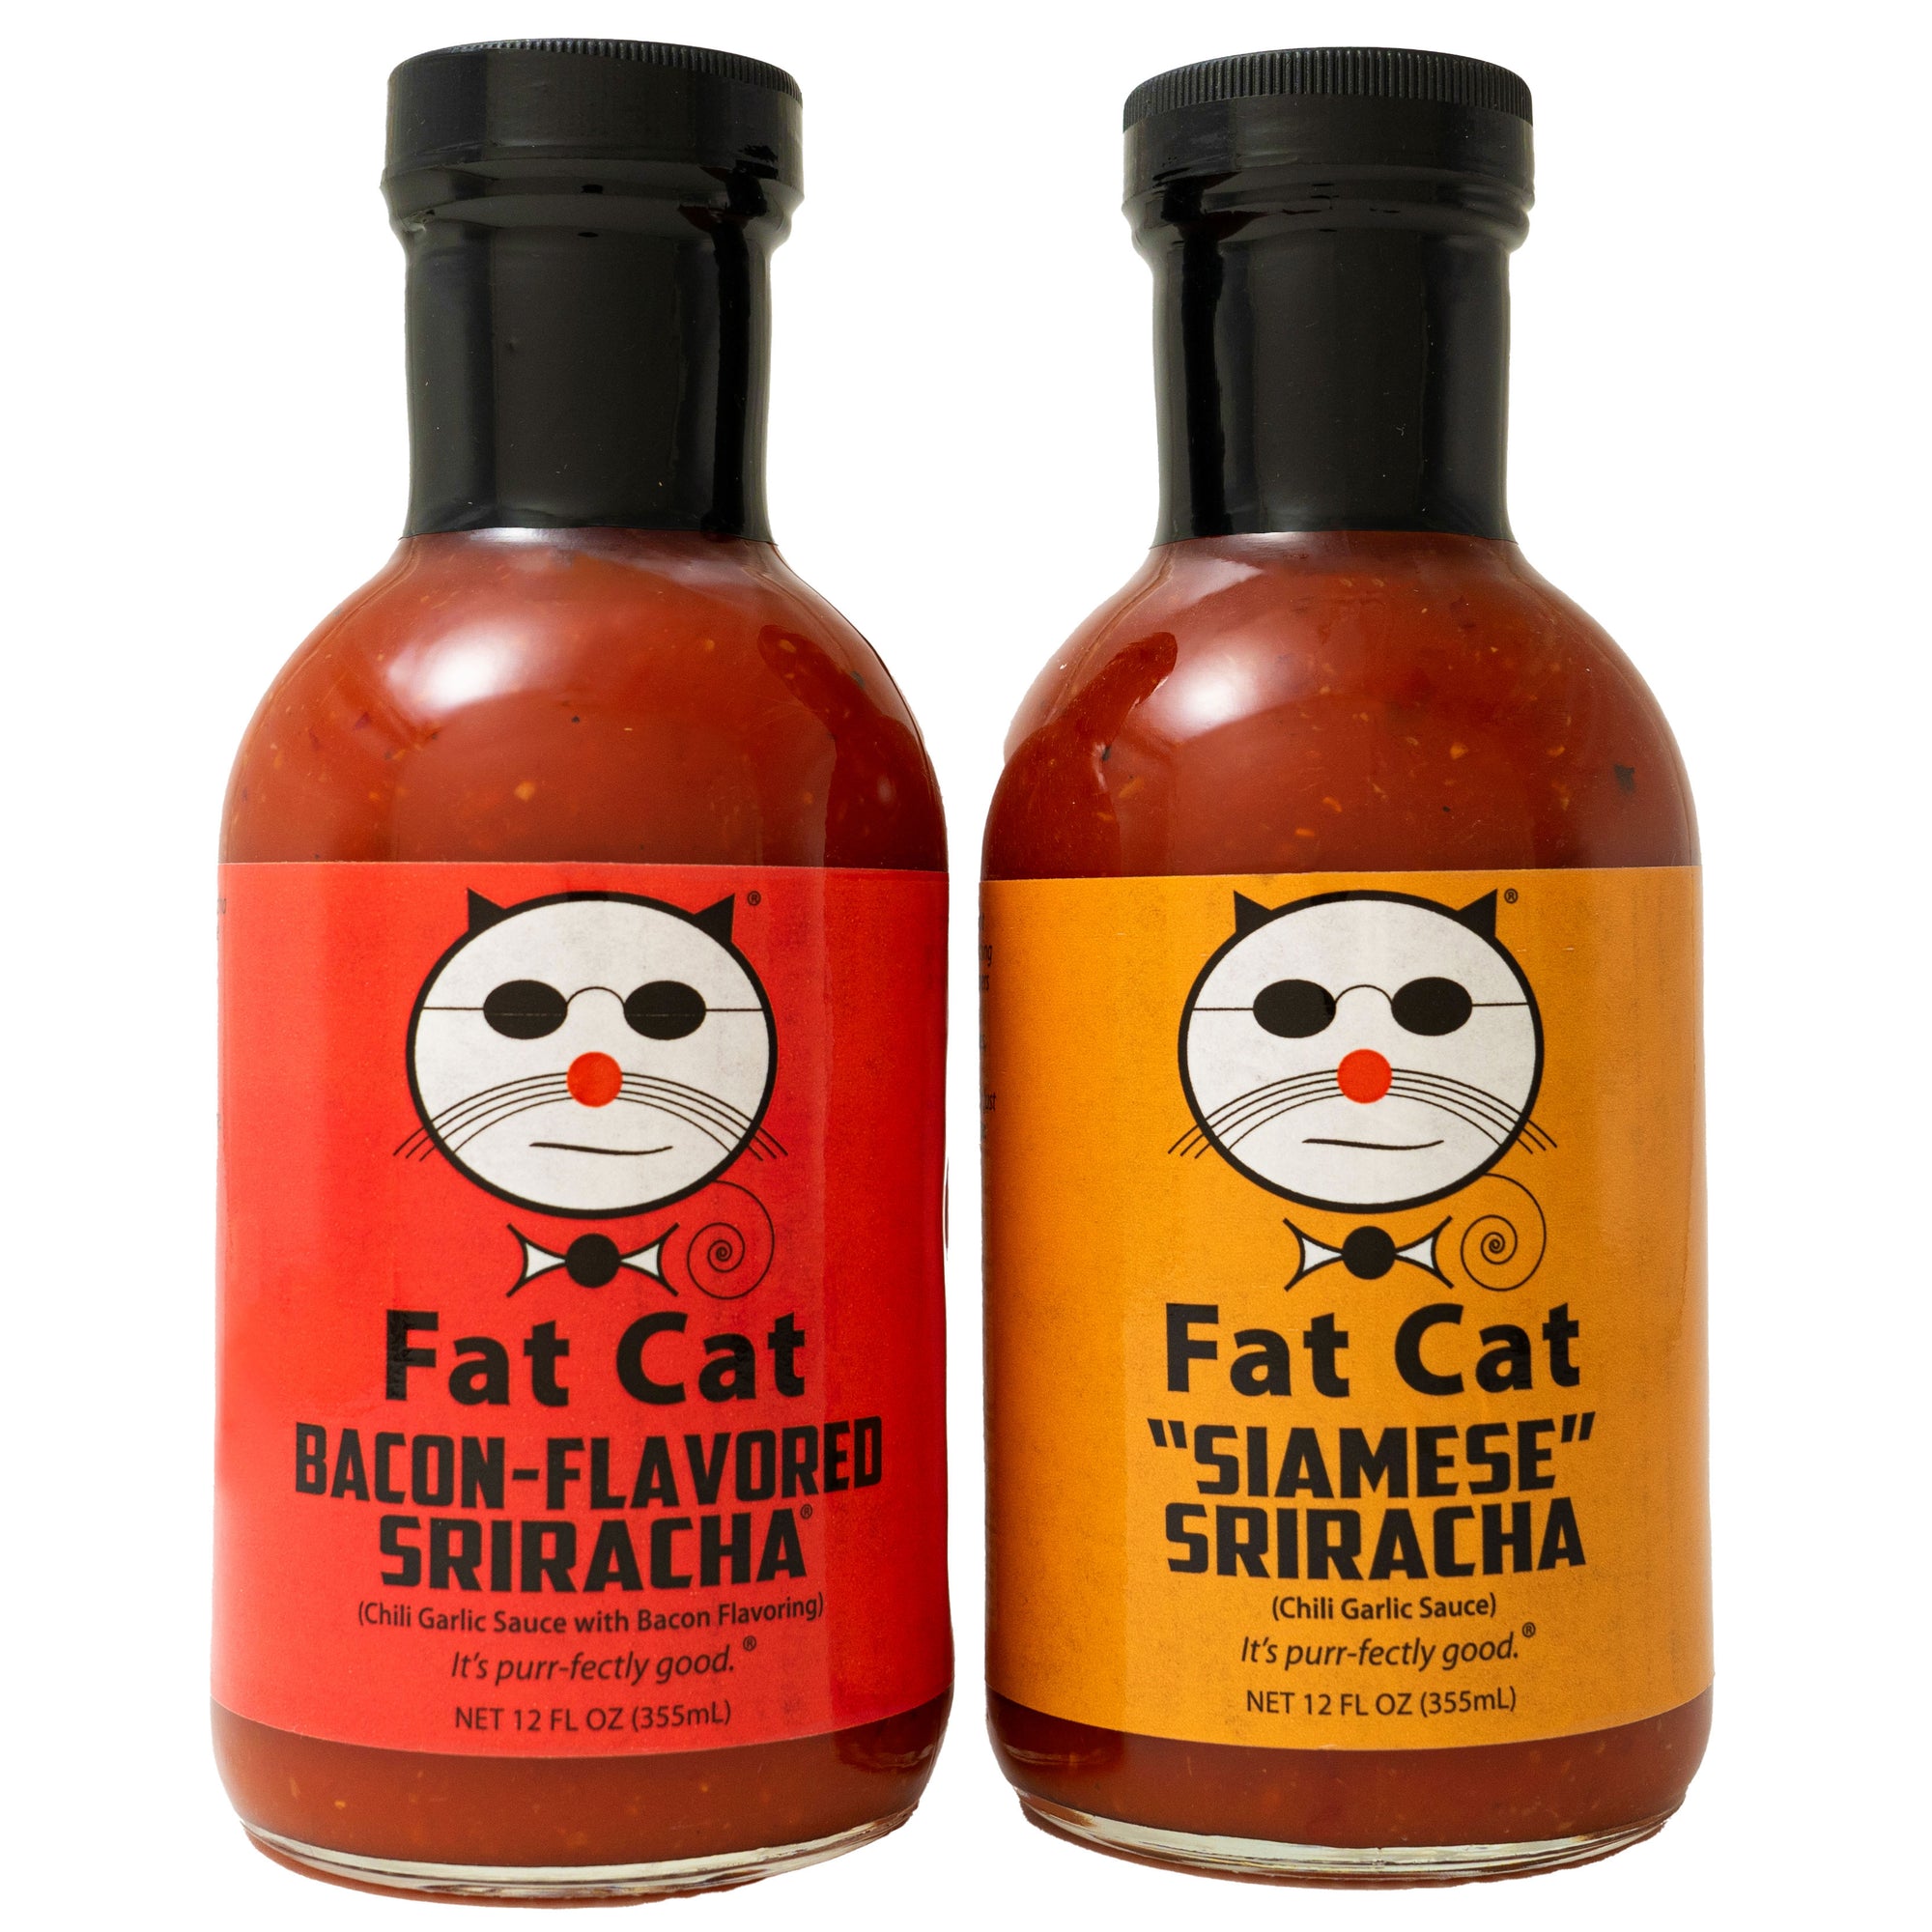 Full Product Line Hot Sauce and Condiment Bundle - Fat Cat Gourmet Hot Sauce & Specialty Condiments